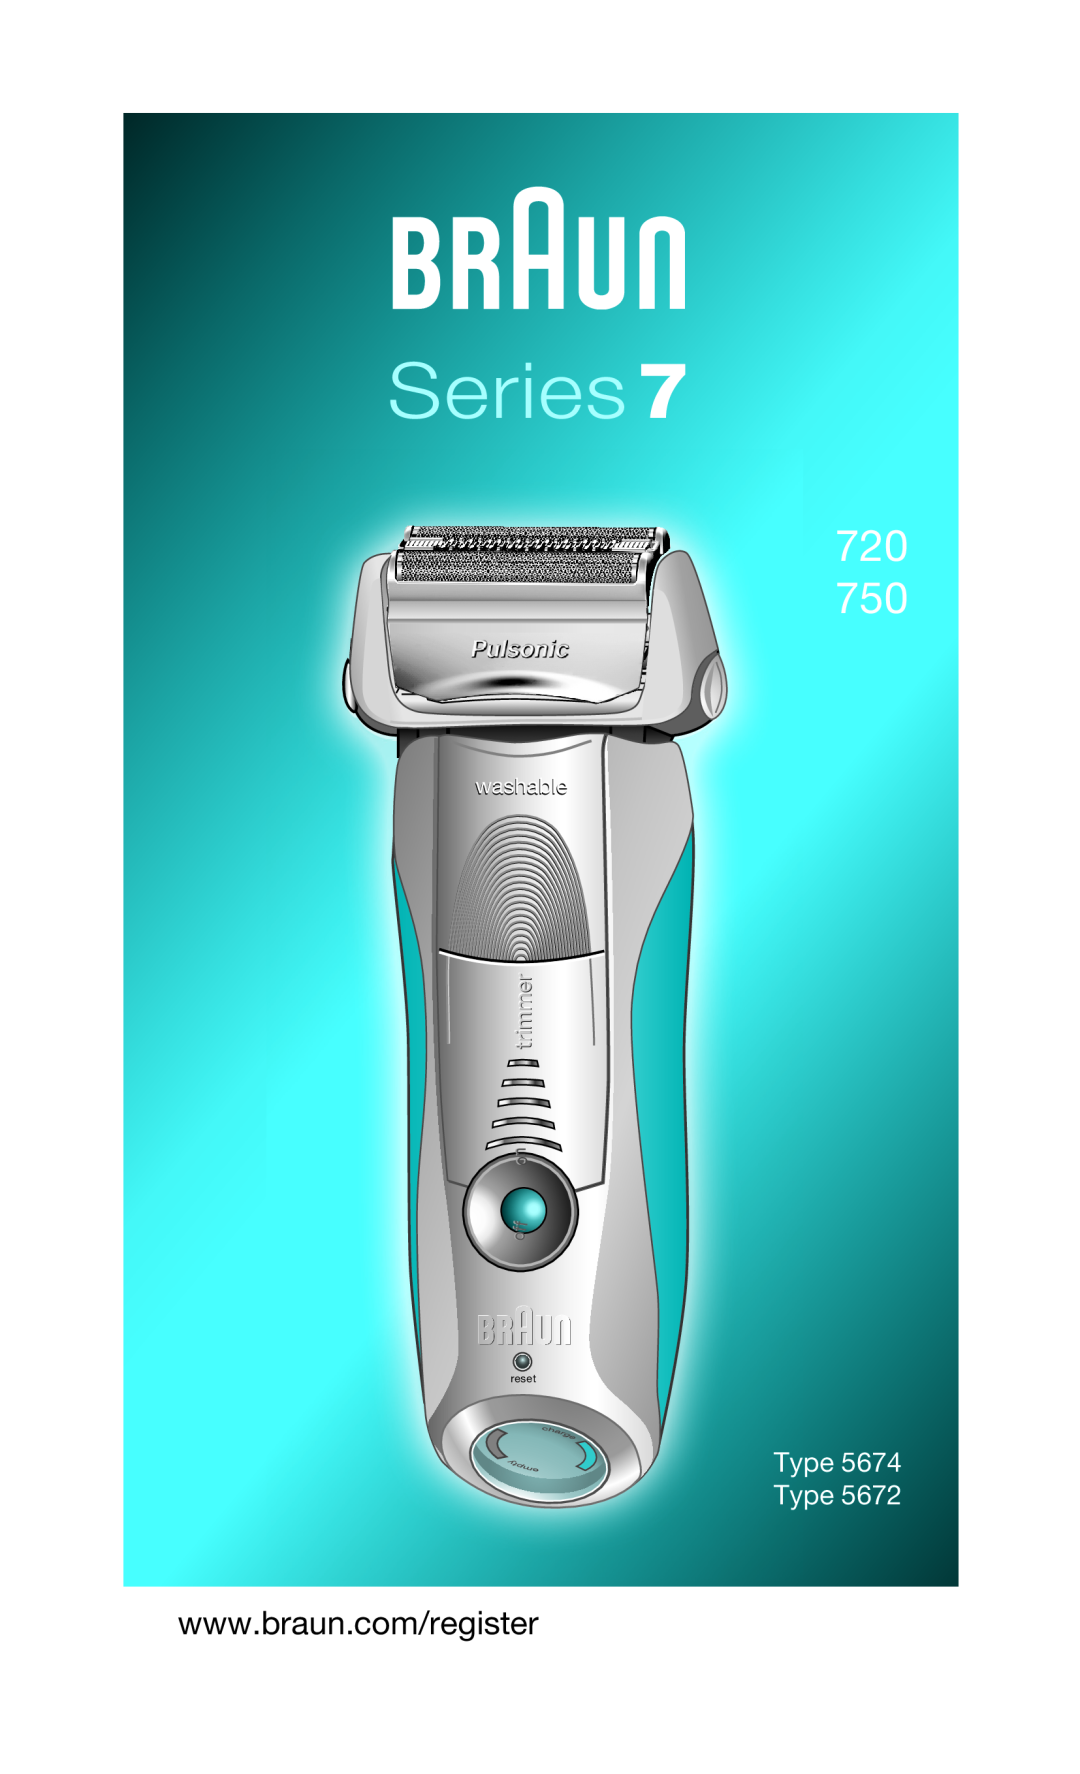 Braun manual Series, 720 750, Type Type, washable, trimmer, on off, reset 